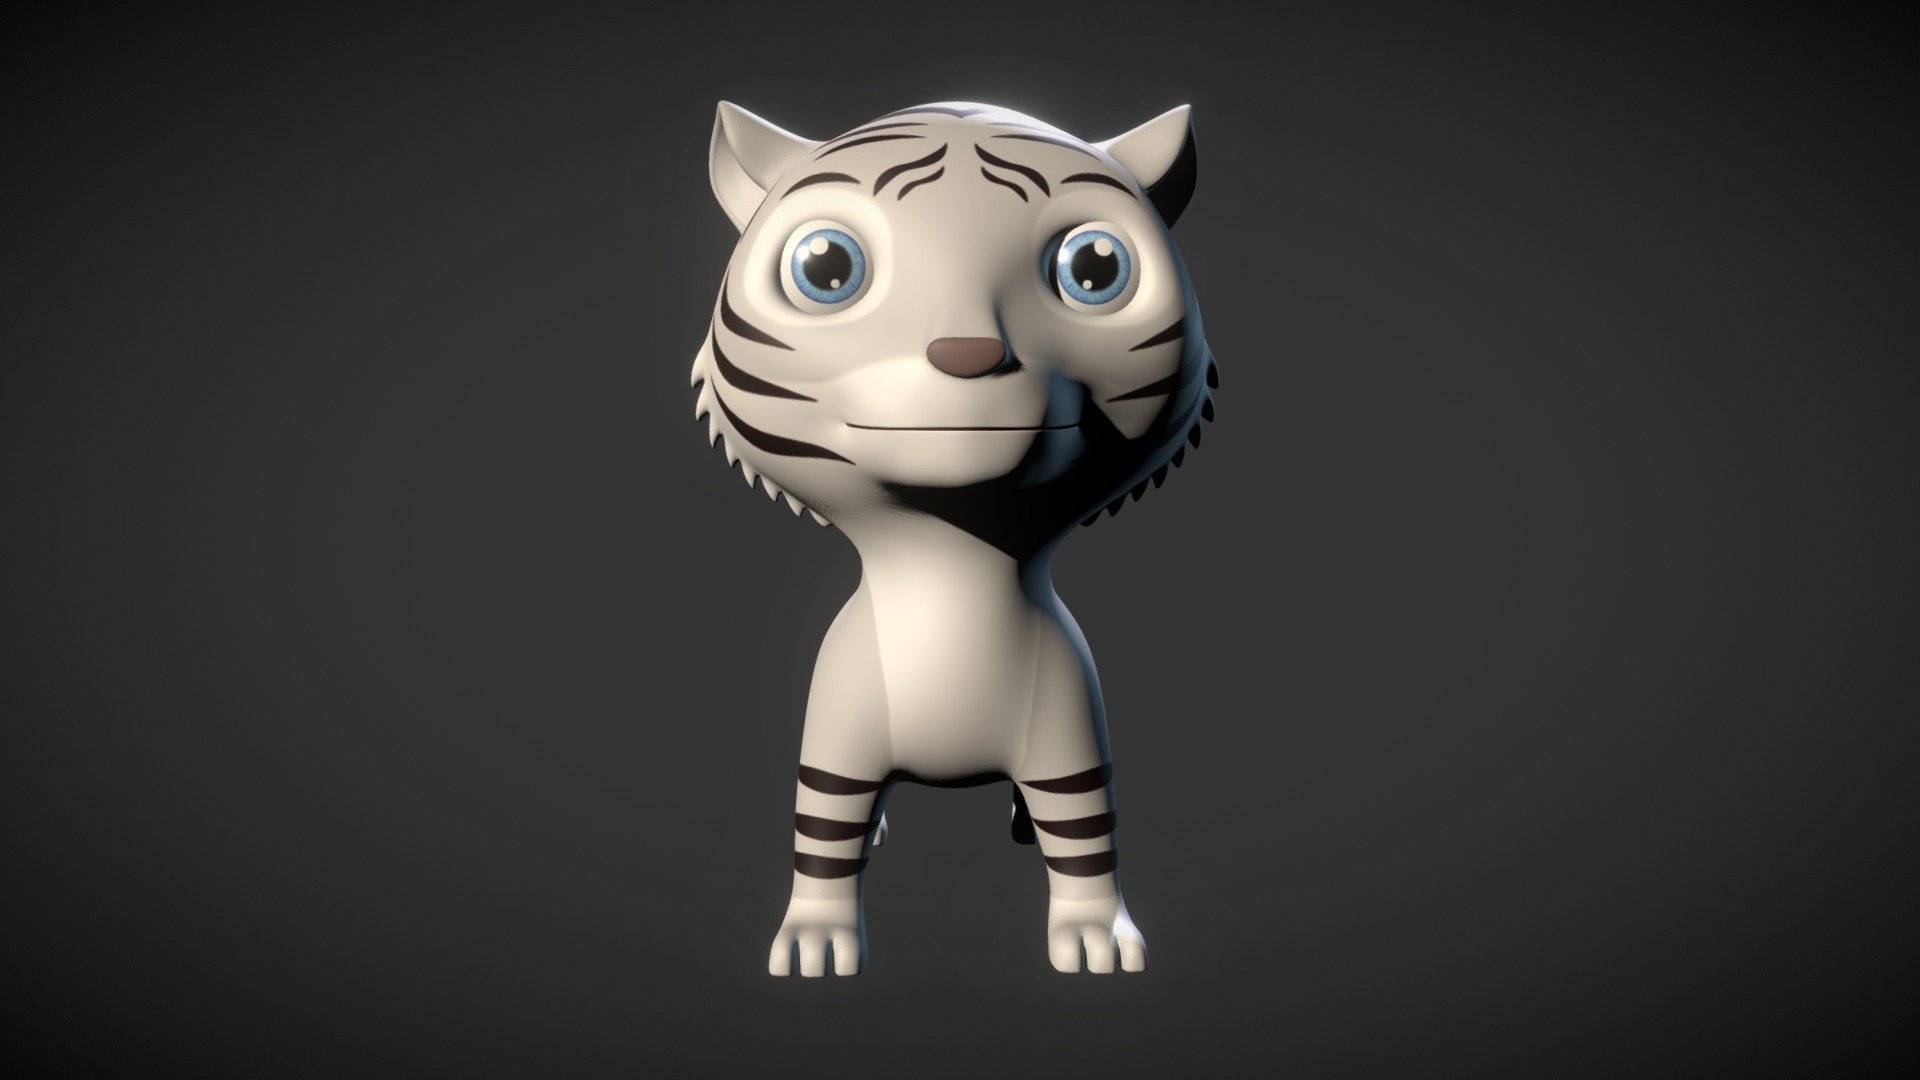 High and low poly model of Cartoon White Tiger.

Product Link: http://3dgalaxy.net/index.php/product/cartoon-white-tiger/ - Cartoon White Tiger - 3D model by 3DGalaxy.net (@3dsmartphone) 3d model